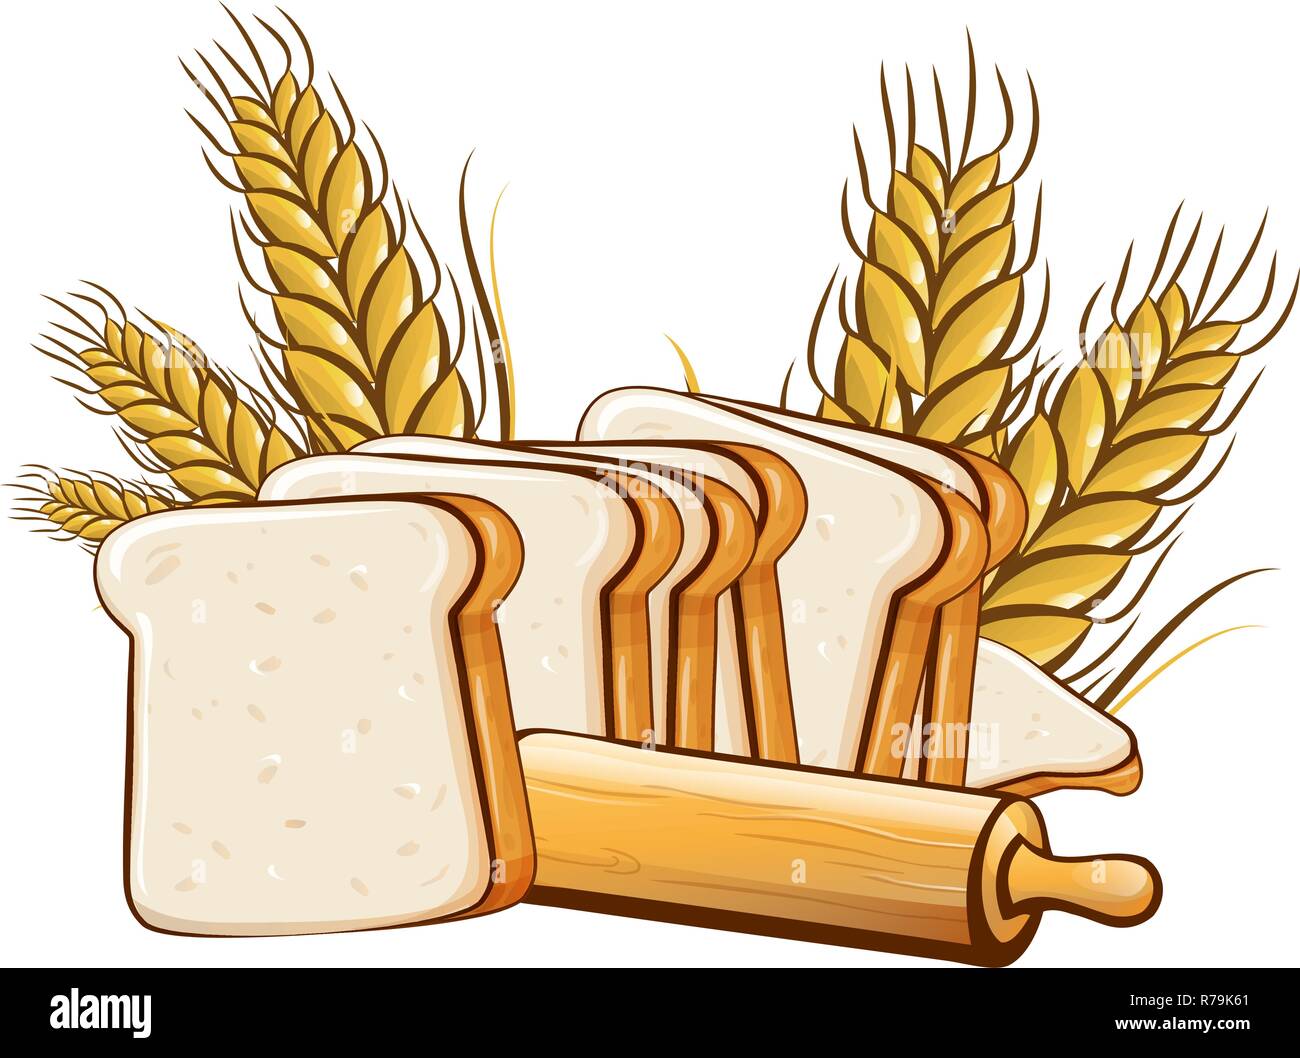 slices bread with rolling pin isolated on white background Stock Vector